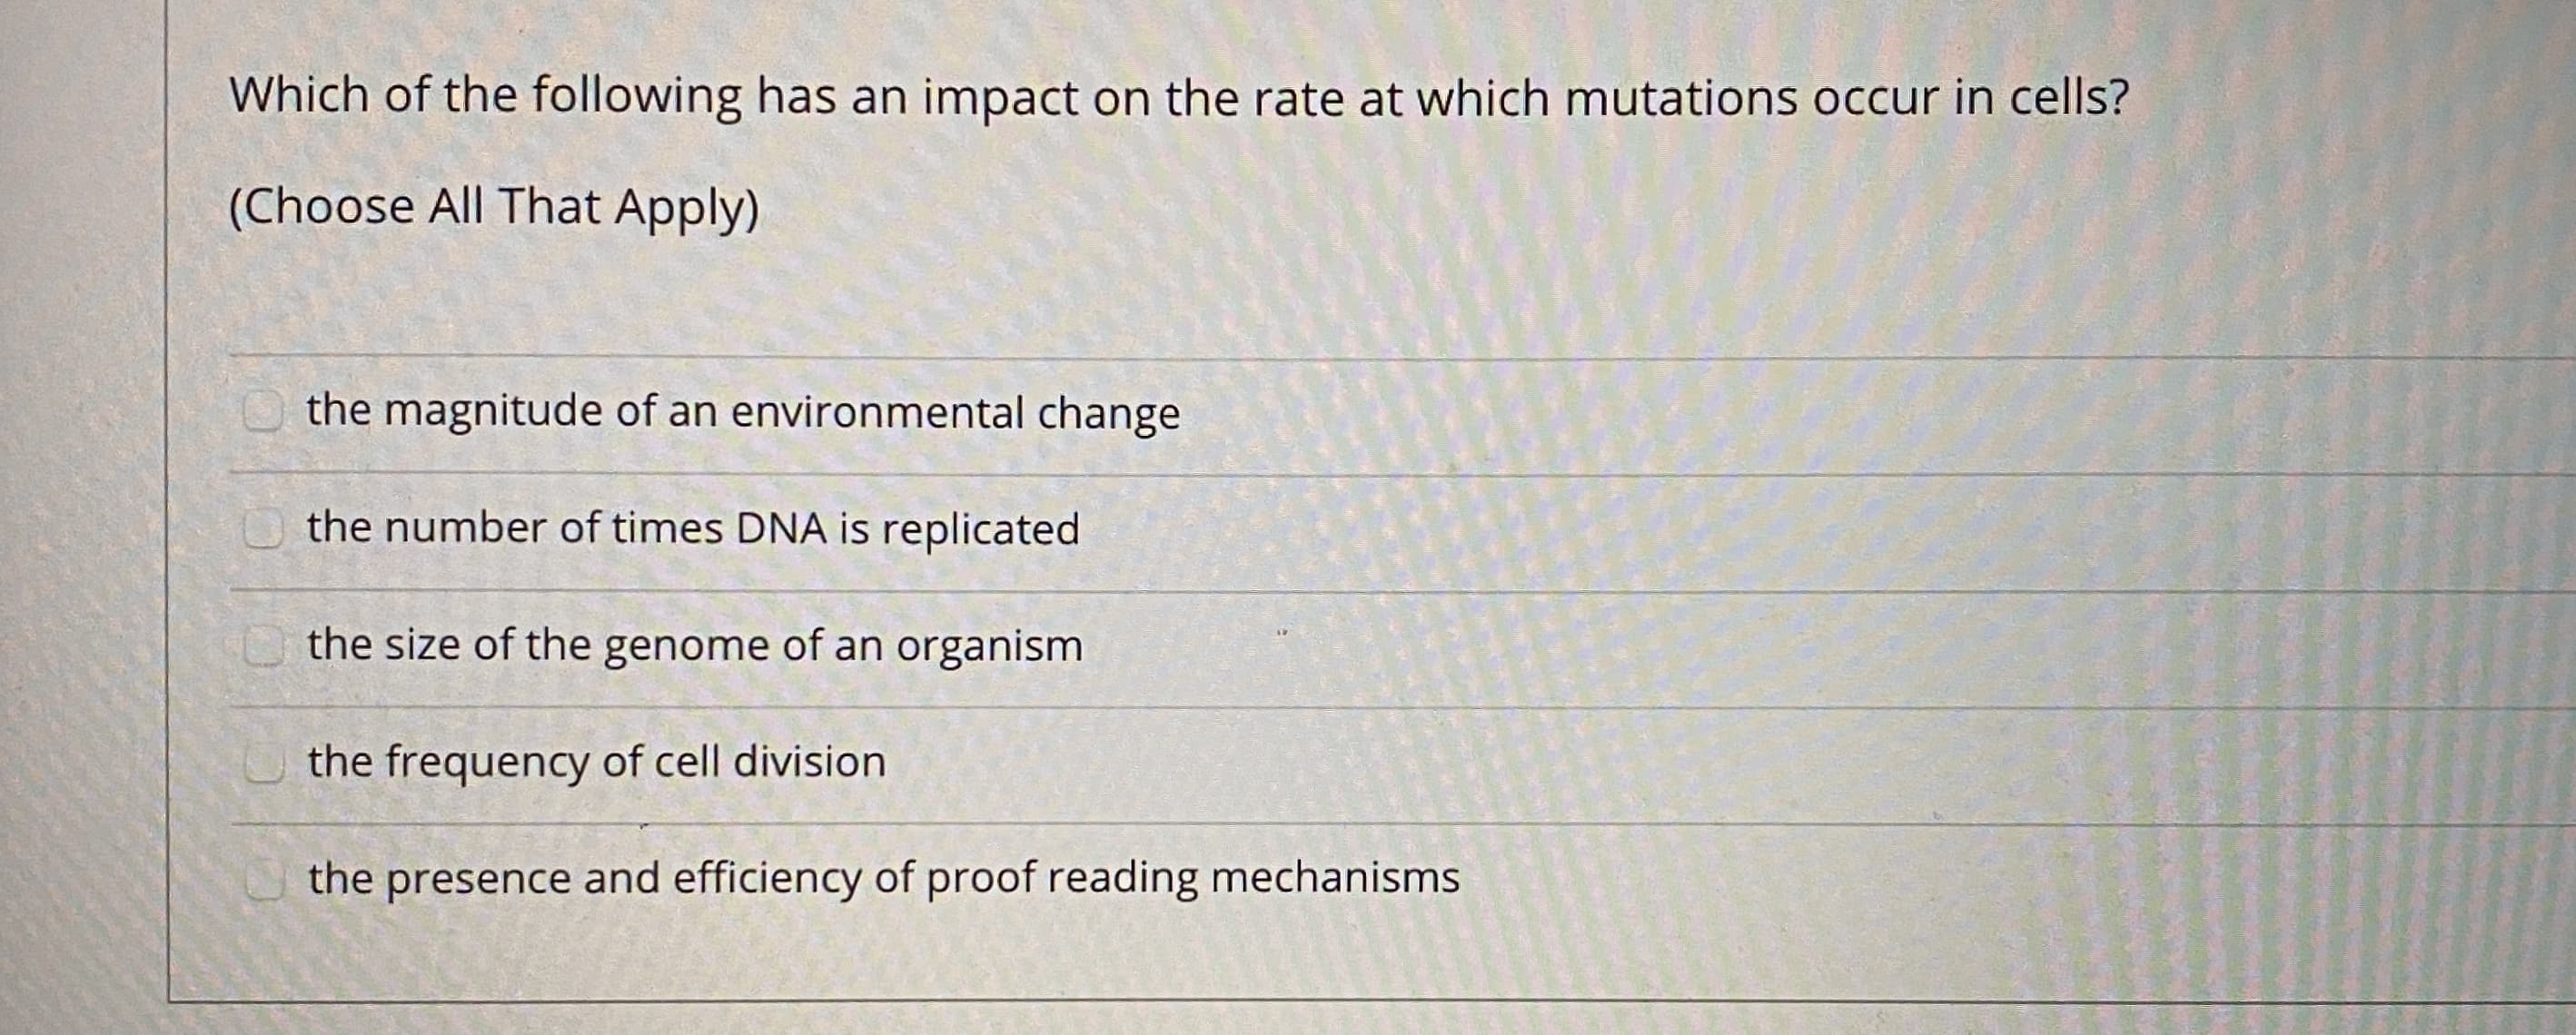 Which of the following has an impact on the rate at which mutations occur in cells?
(Choose All That Apply)
the magnitude of an environmental change
the number of times DNA is replicated
the size of the genome of an organism
the frequency of cell division
